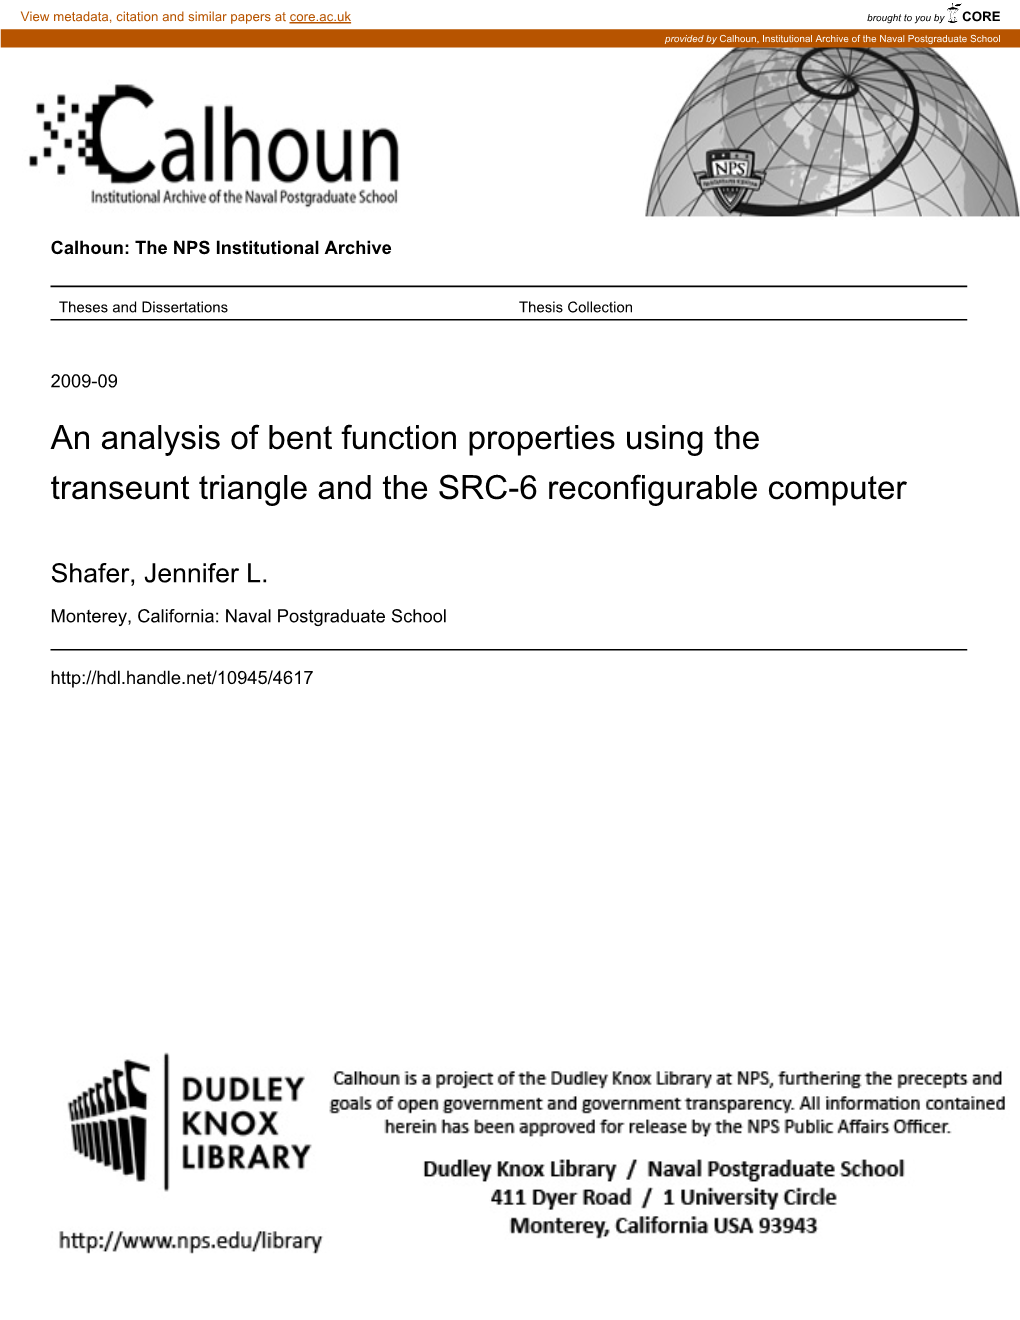 An Analysis of Bent Function Properties Using the Transeunt Triangle and the SRC-6 Reconfigurable Computer